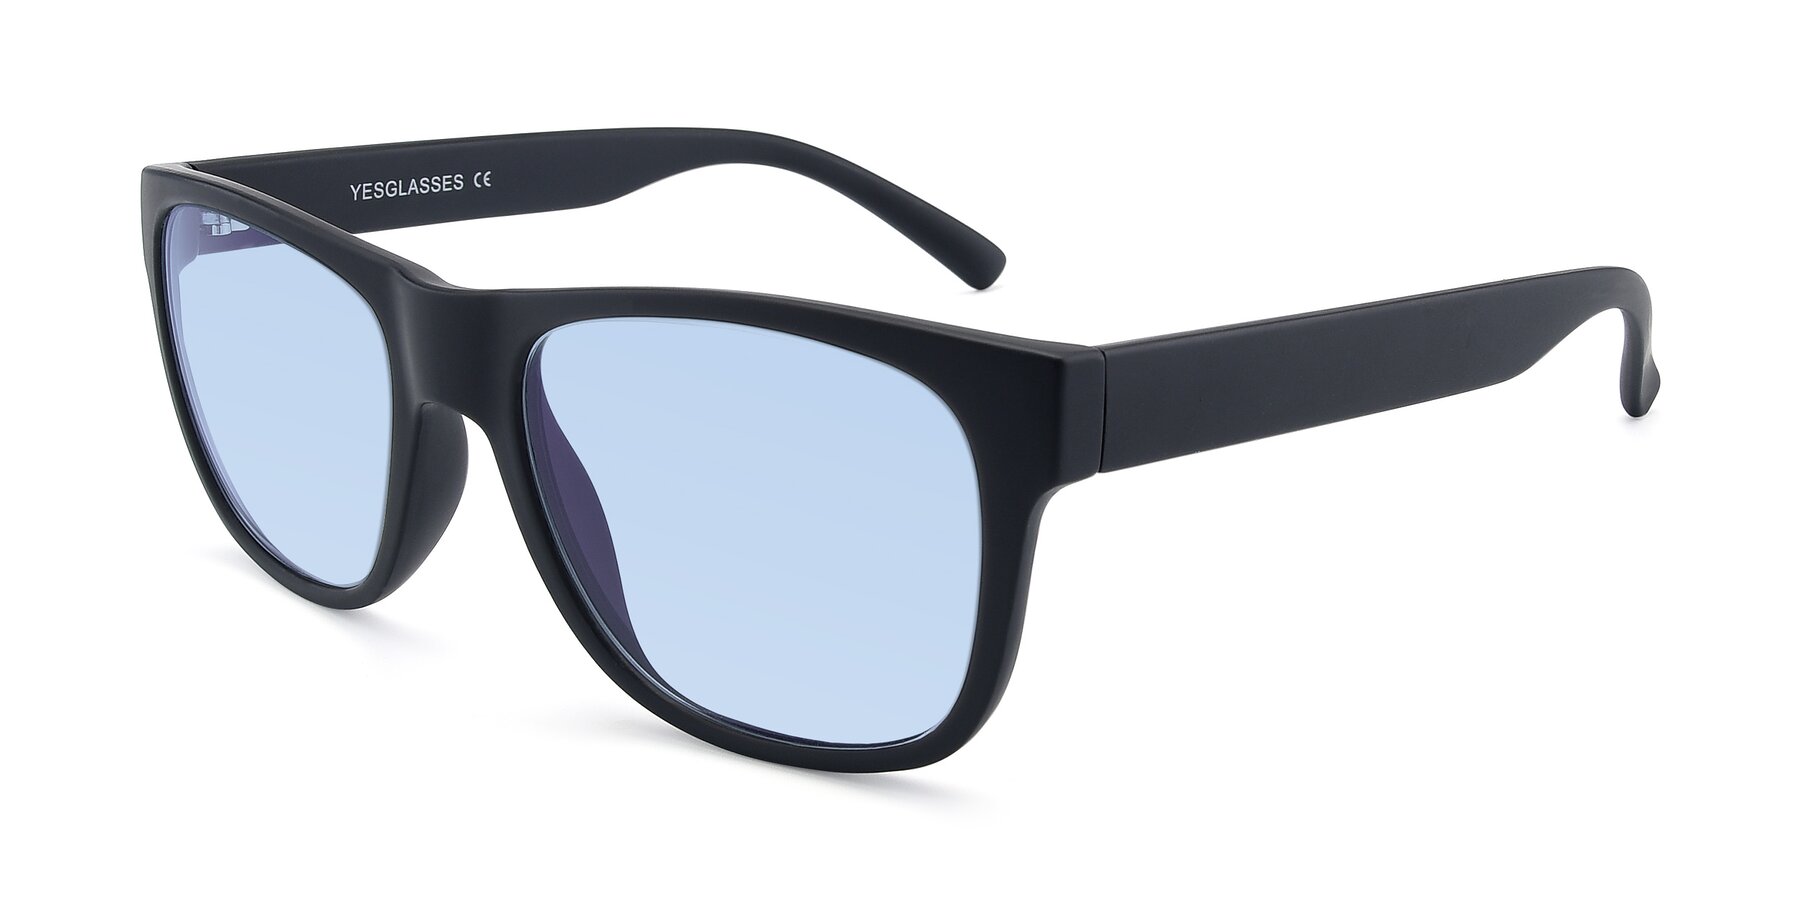 Angle of SSR213 in Matte Black with Light Blue Tinted Lenses